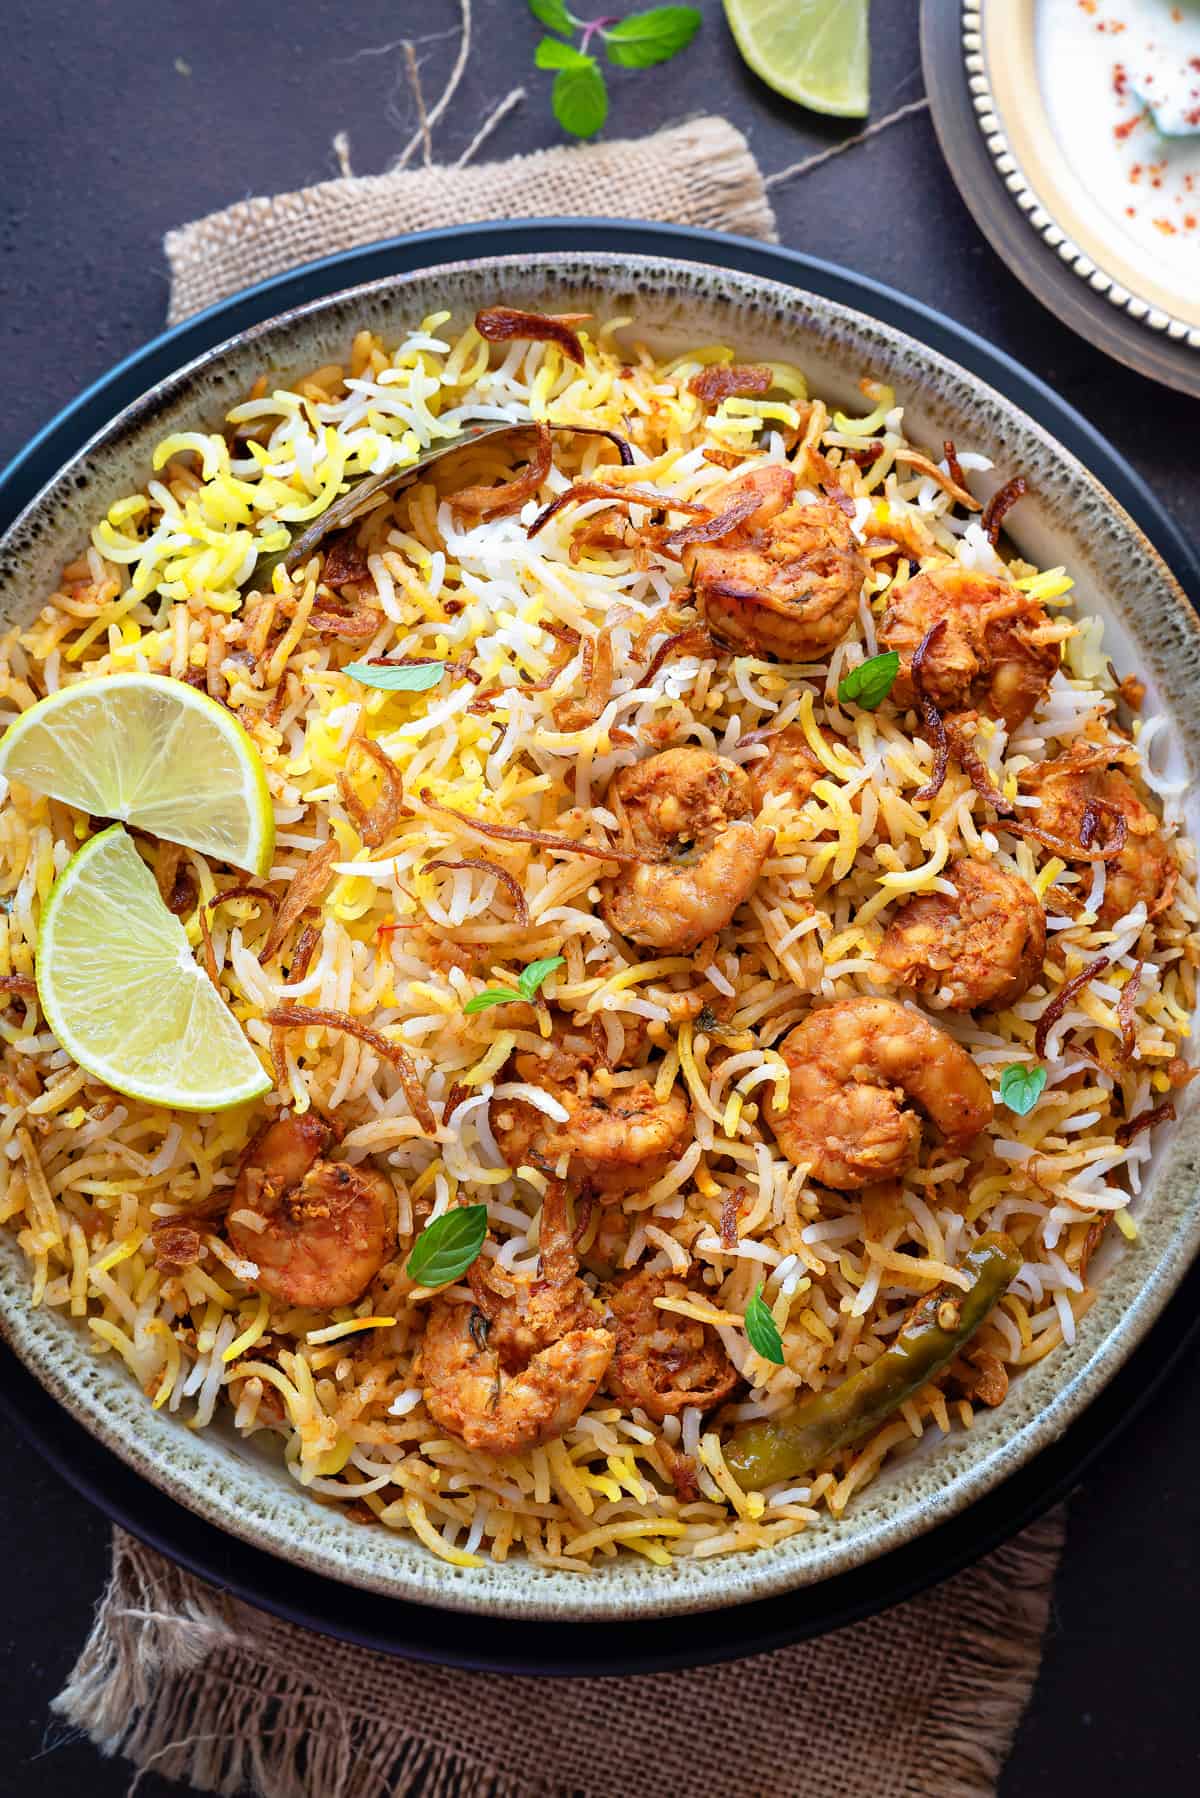 Closeup shot of prawn biryani served in grey ceramic bowl with a spoon placed into it.